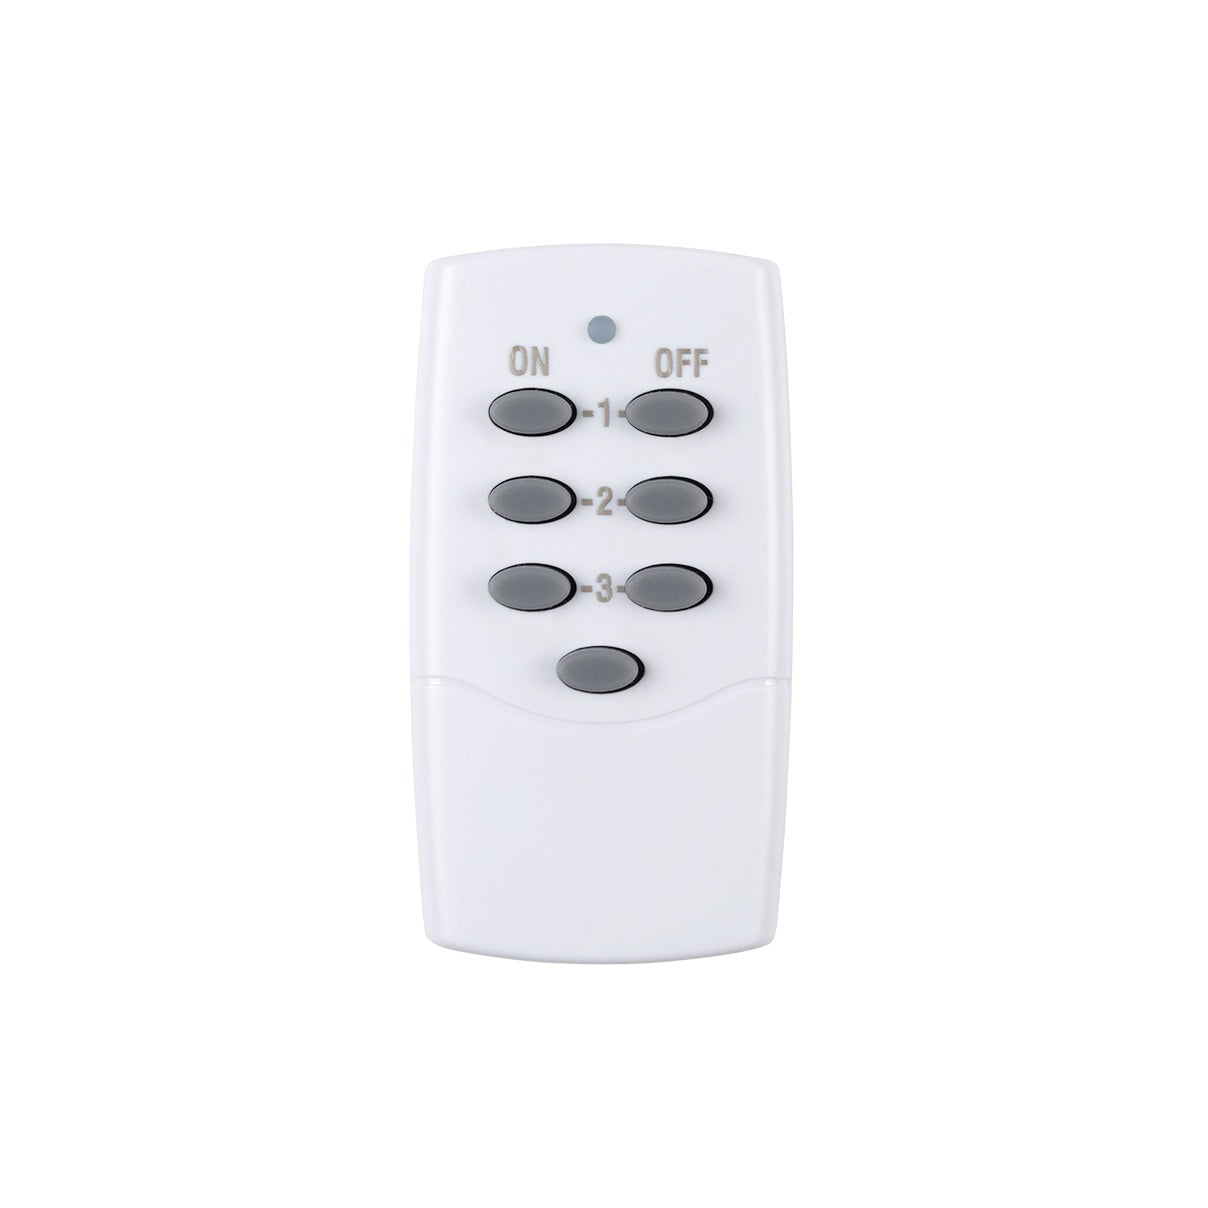 Mini Wireless Remote Control Outlet Switch Power Plug (2 Remotes+5 Outlets)  BN-LINK